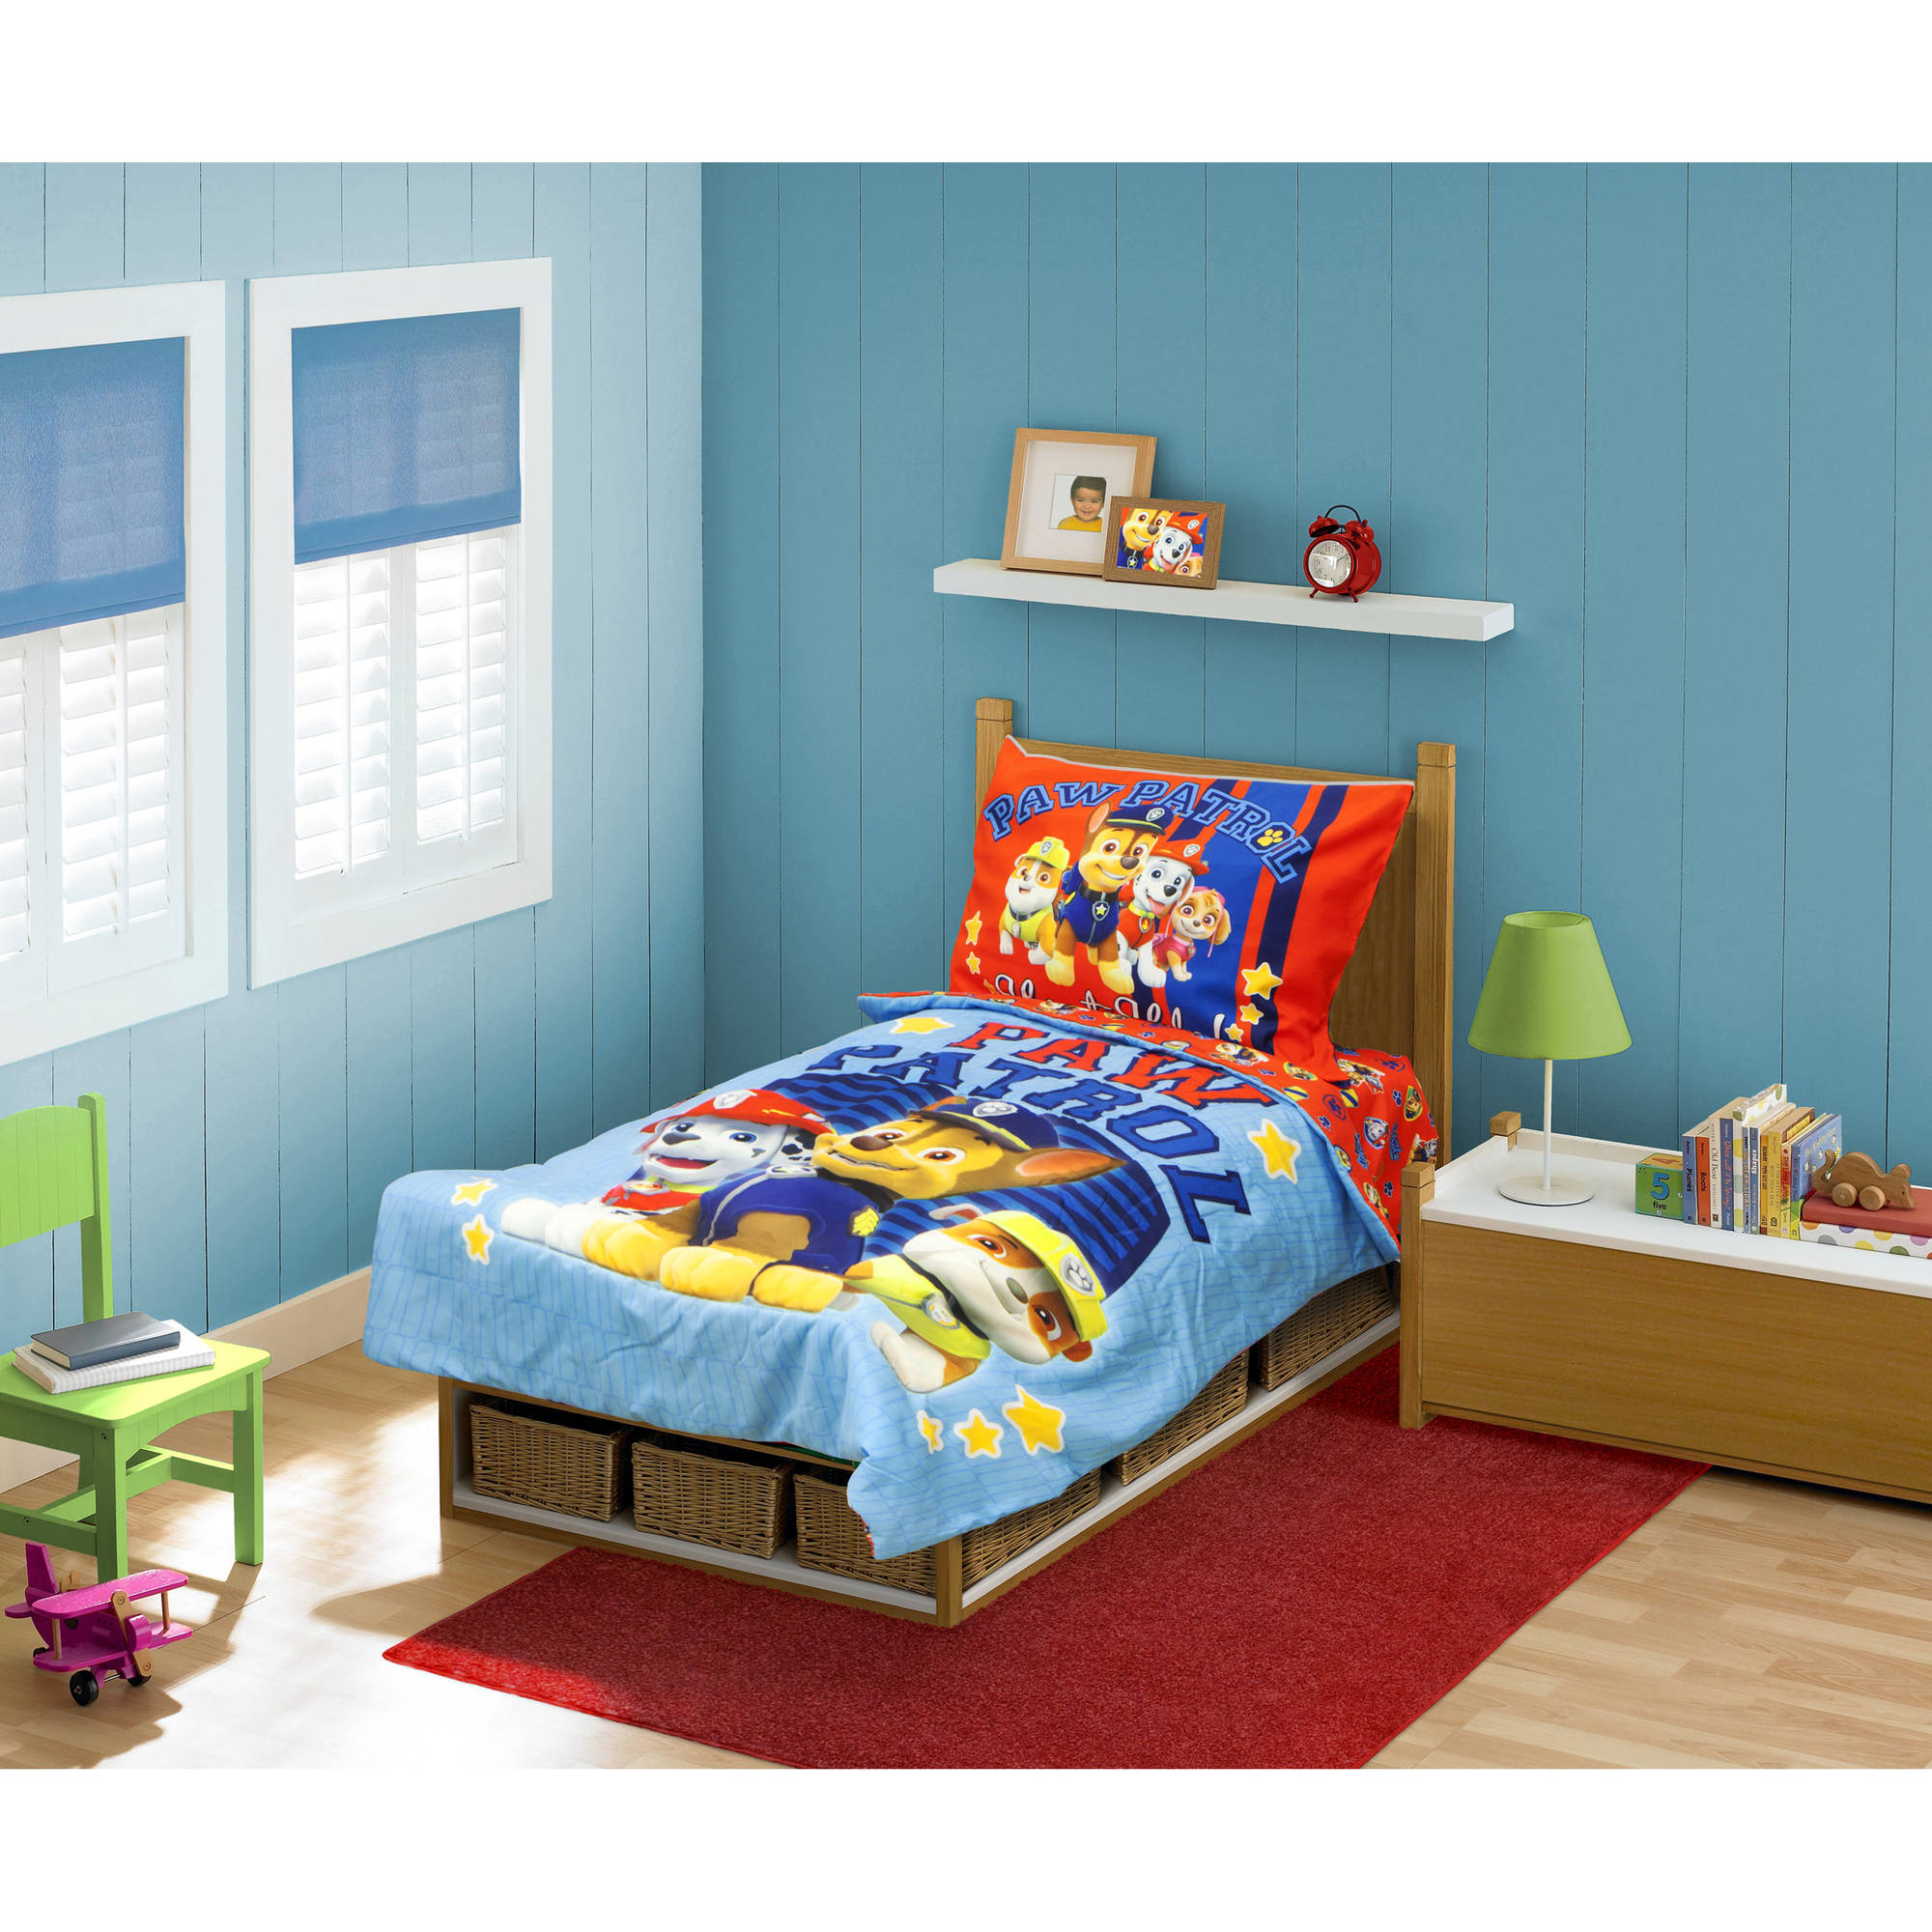 Baboom Nick Jr Paw Patrol 4 Piece Toddler Bedding Set Here To Help within dimensions 2000 X 2000